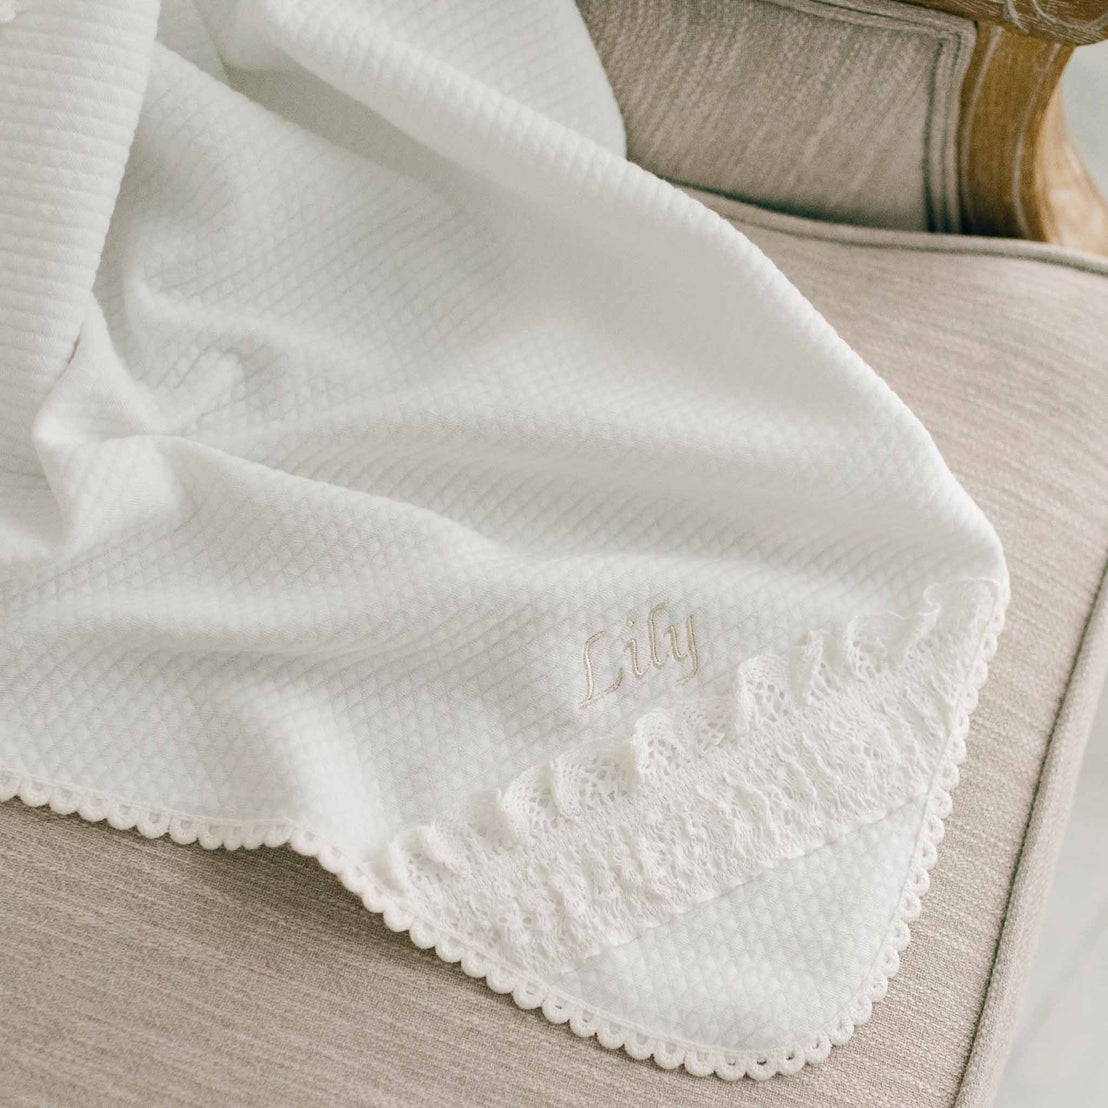 Flat lay of the Lily Personalized Blanket. The photo showcases 100% light ivory textured cotton and the corner of the blanket made with ivory lace. The name "Lily" is stitched in champagne thread into the blanket